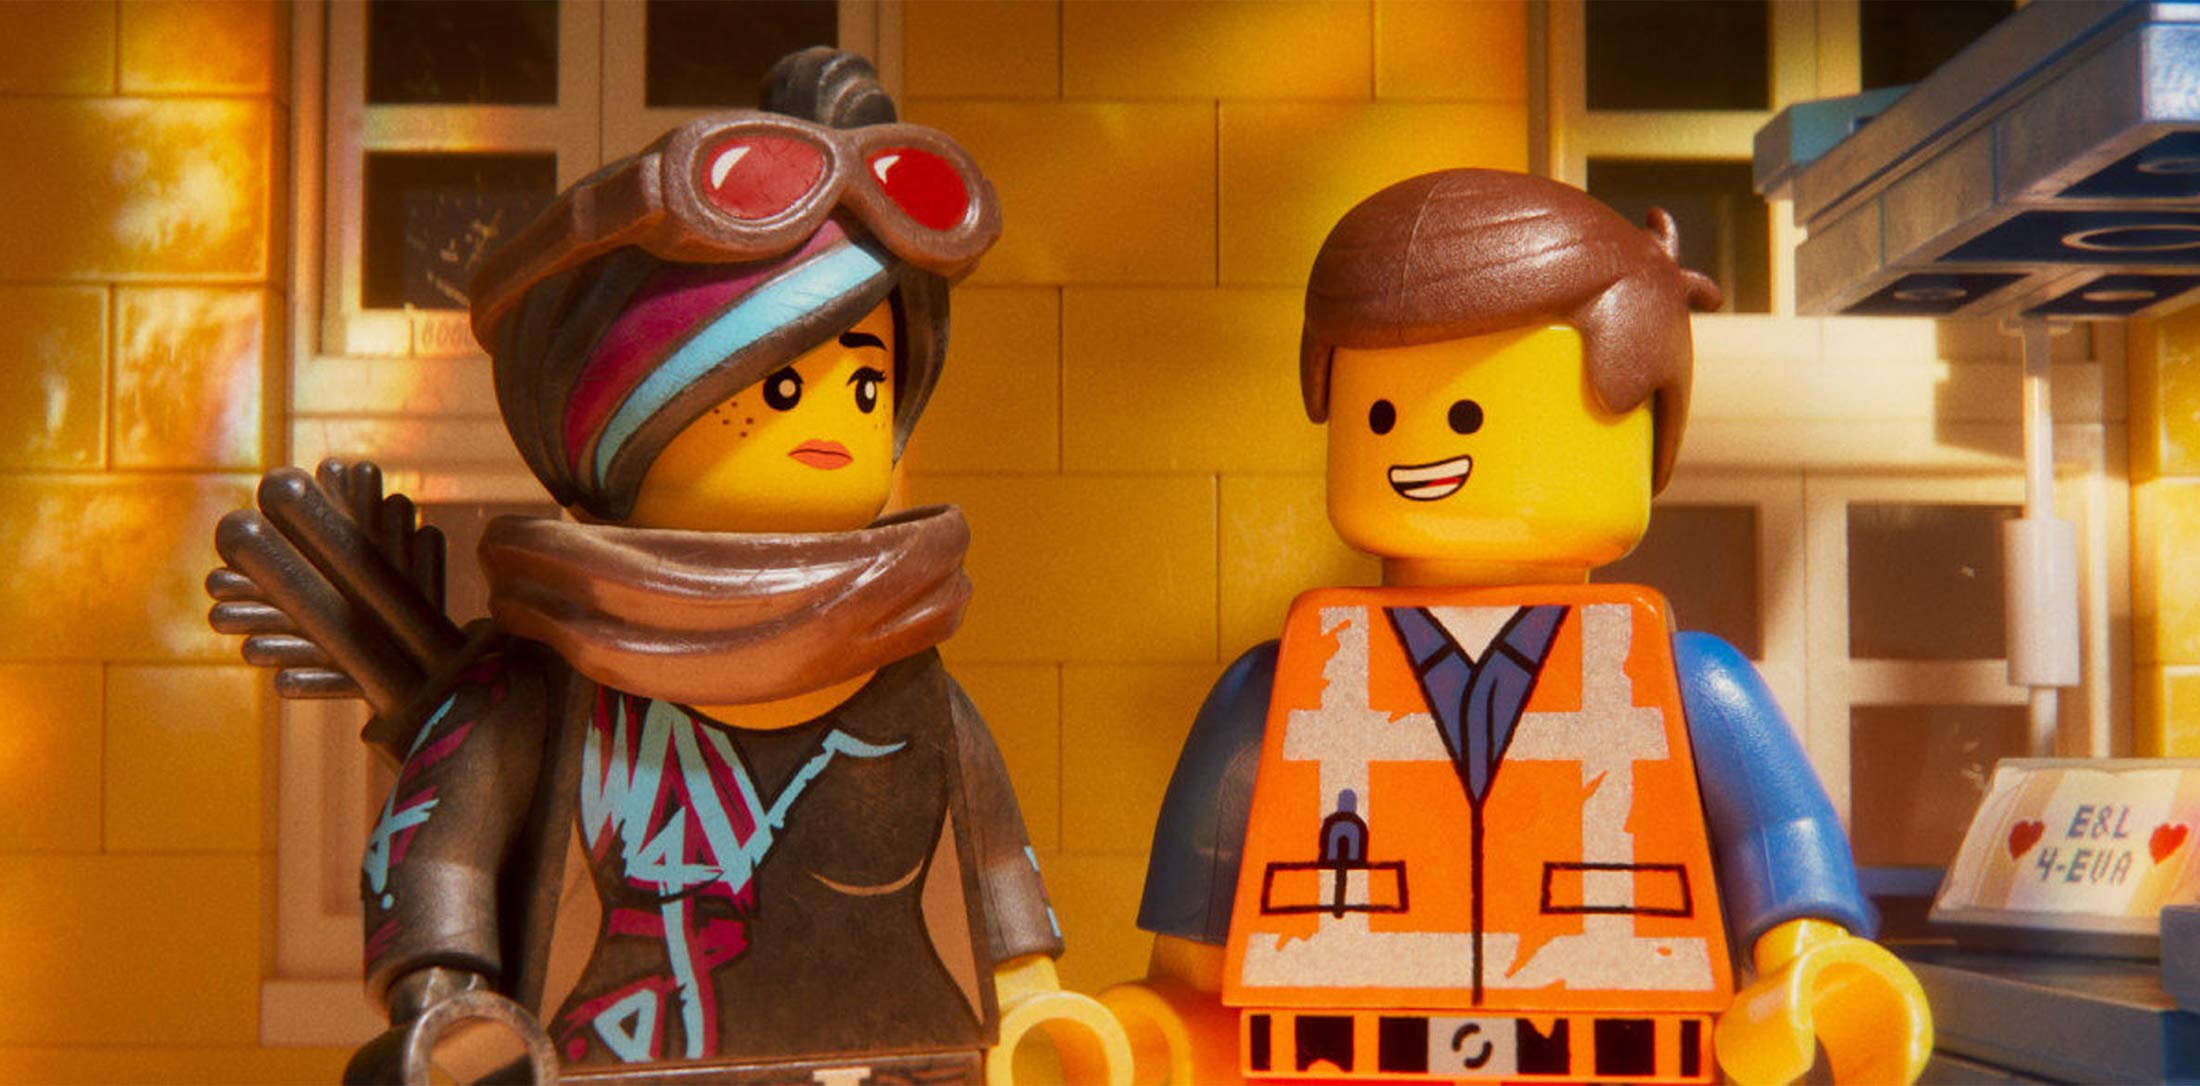 Lego Movie 2' to Test Whether Bricks Still Click With Kids - Bloomberg